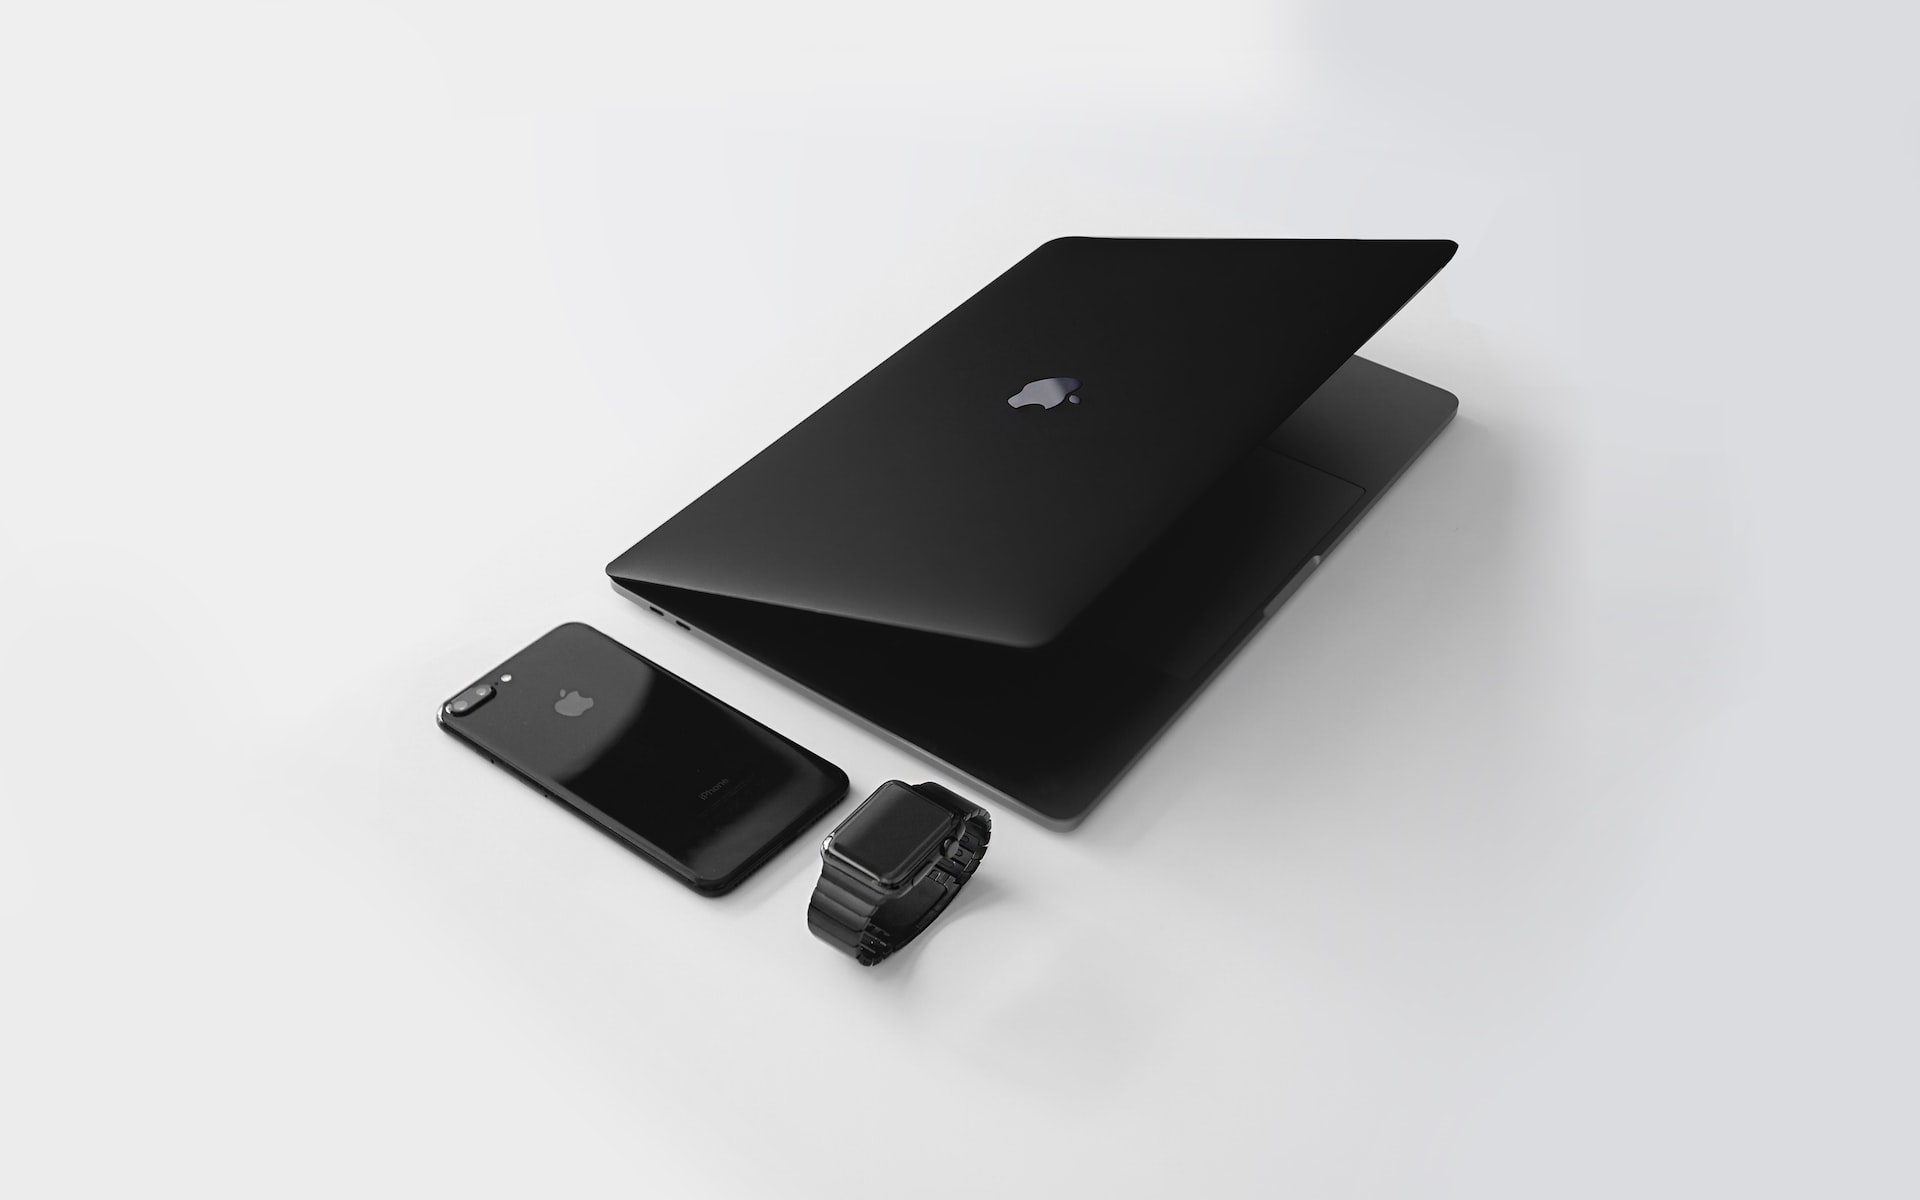 Black iPhone, MacBook, and Apple Watch kept together